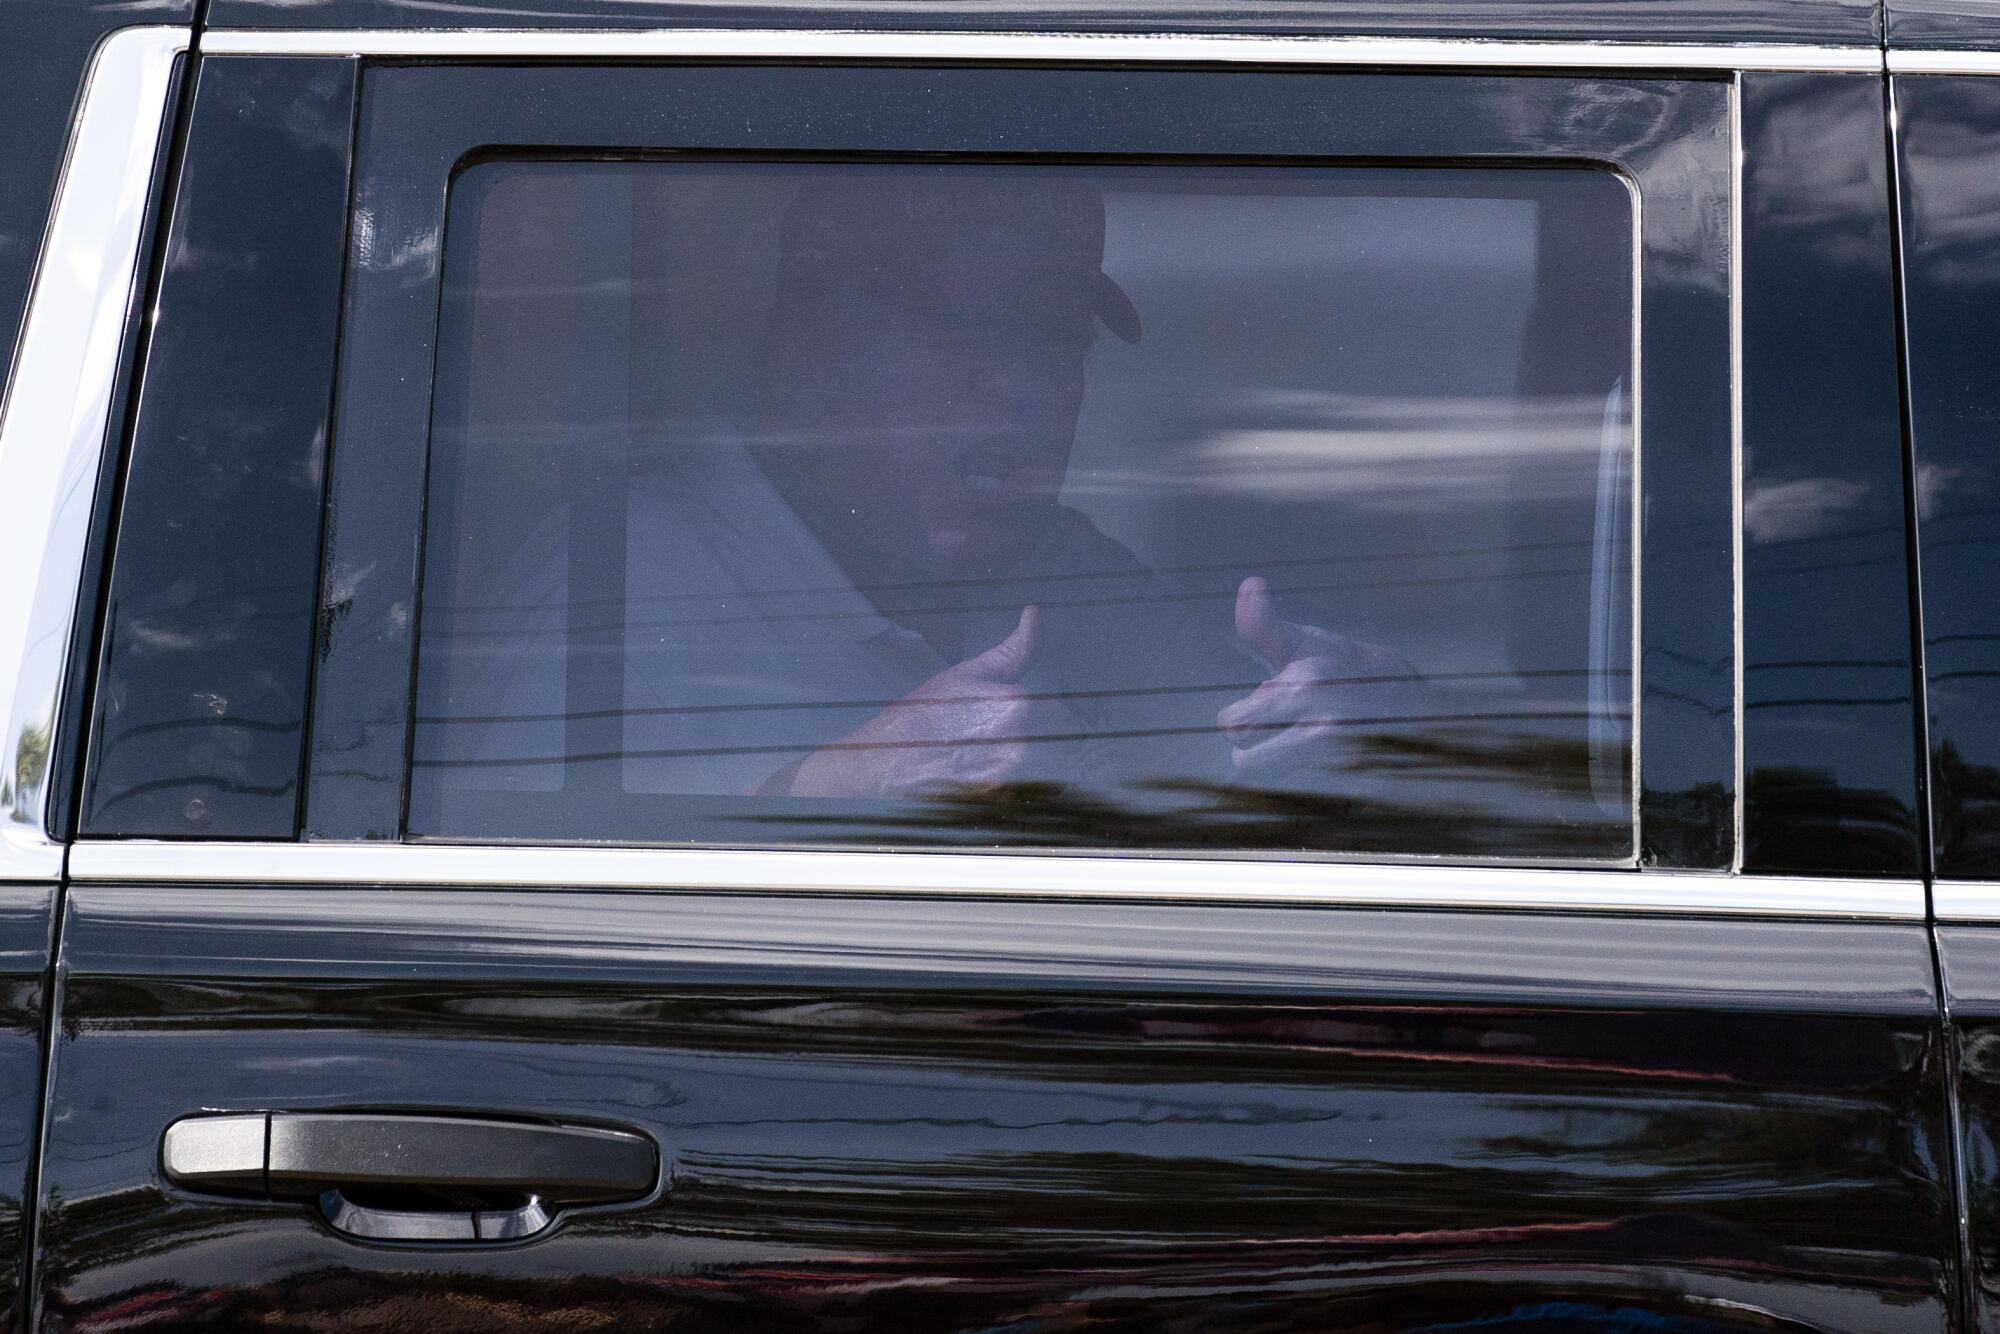 Donald Trump, wearing a red cap, gives two thumbs-up as he rides in the back of a car.